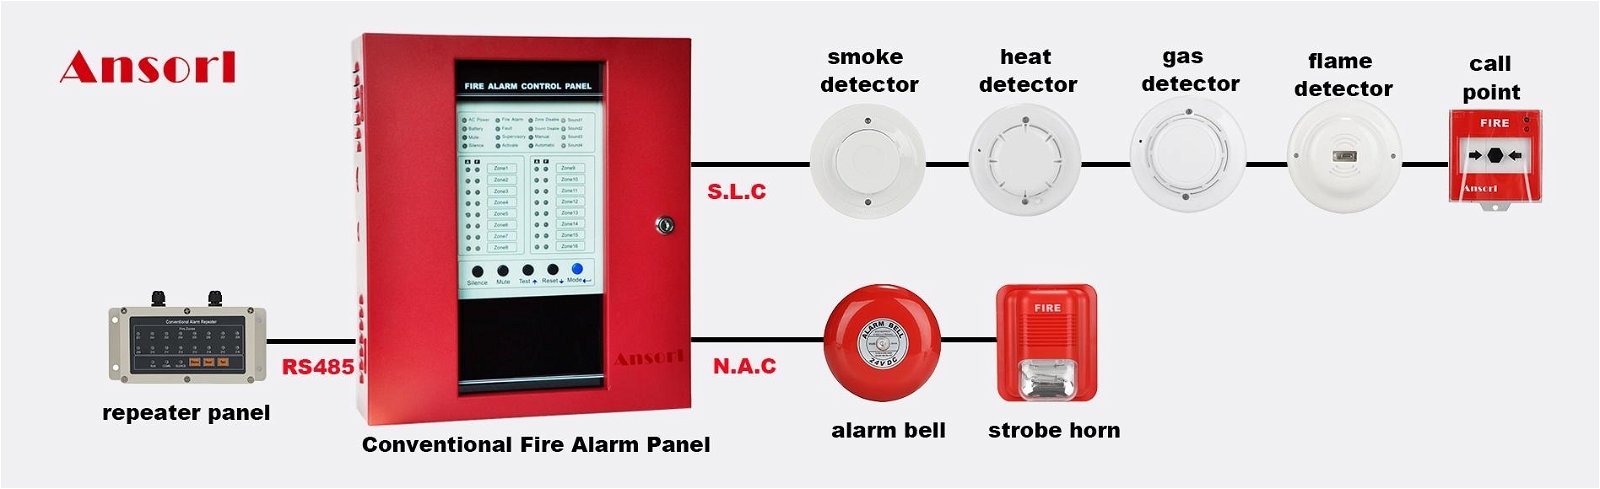 ansorl conventional fire alarm system